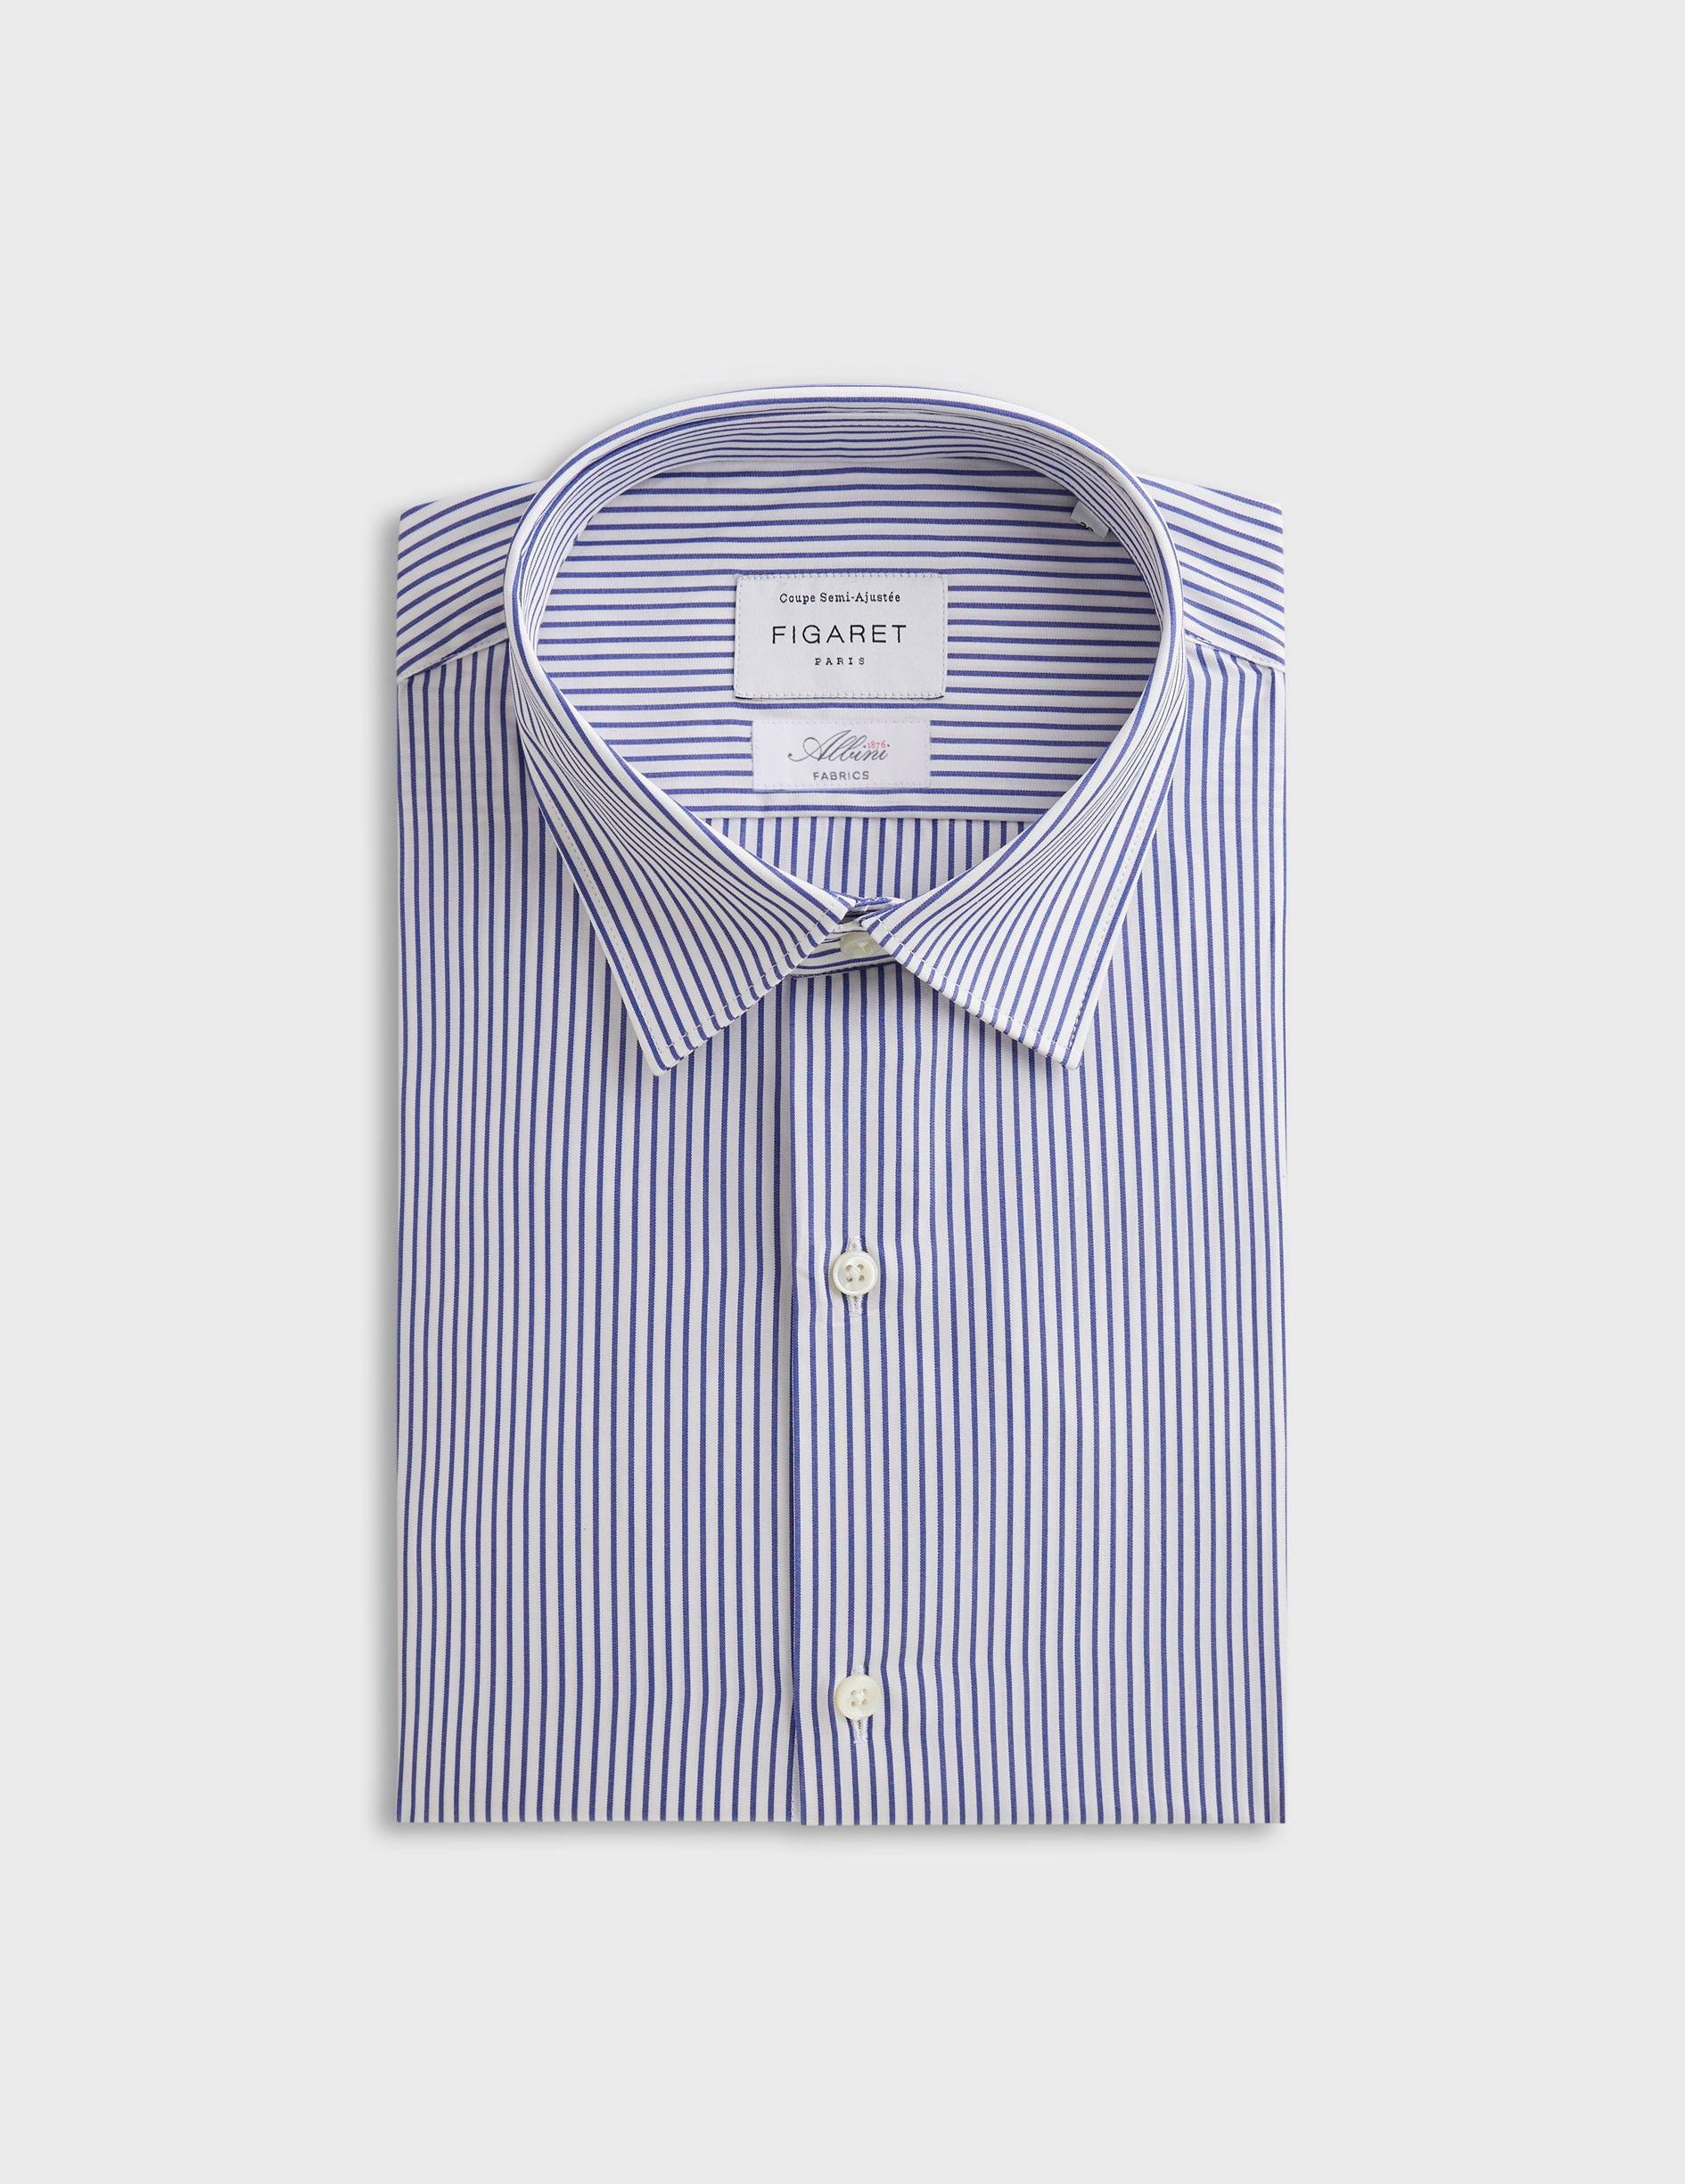  Semi-fitted navy striped shirt - Poplin - Figaret Collar - French Cuffs